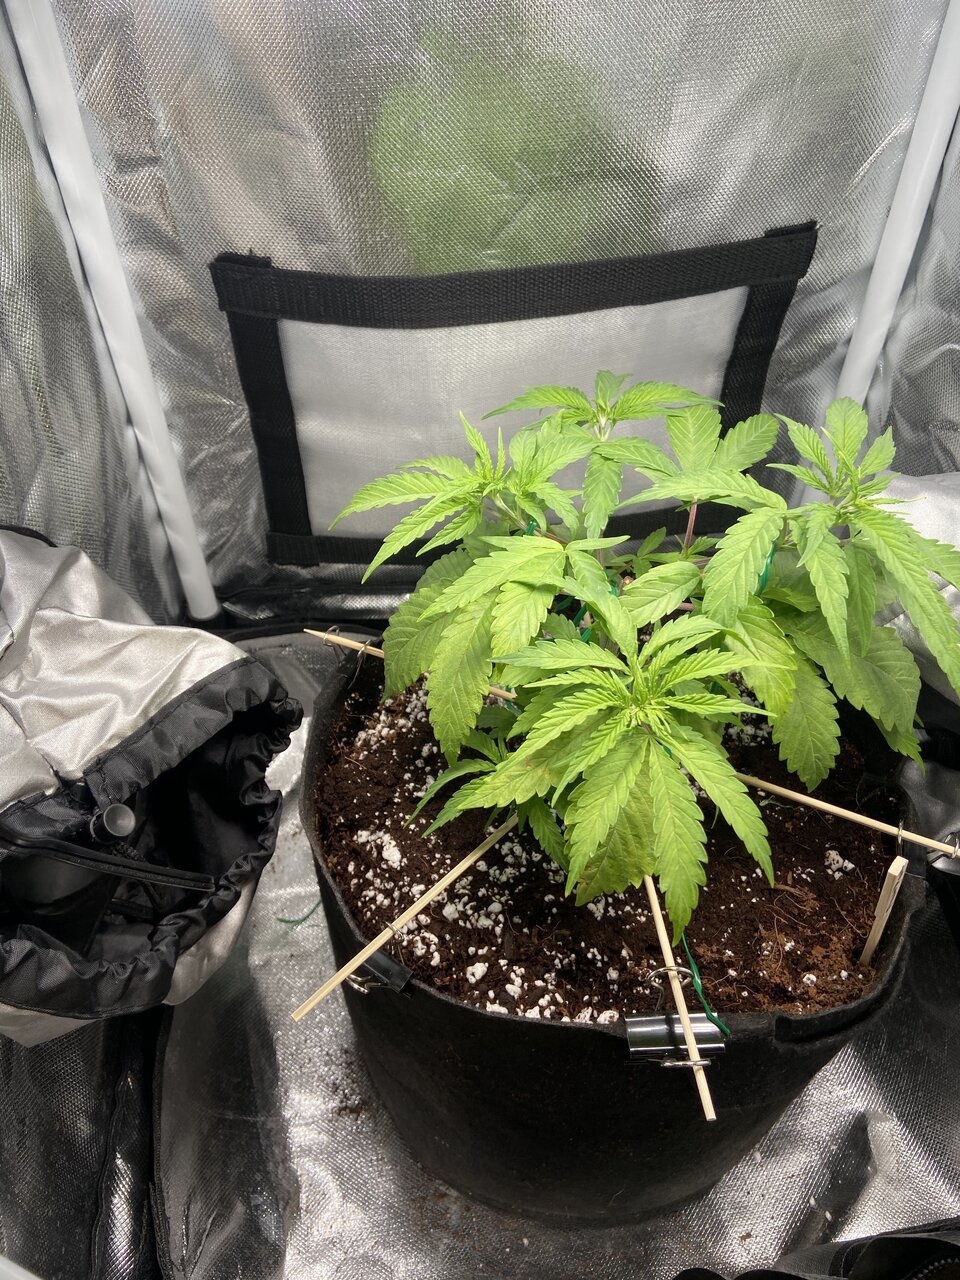 Flower Power. Topped 1 week ago and trained down on chopsticks.